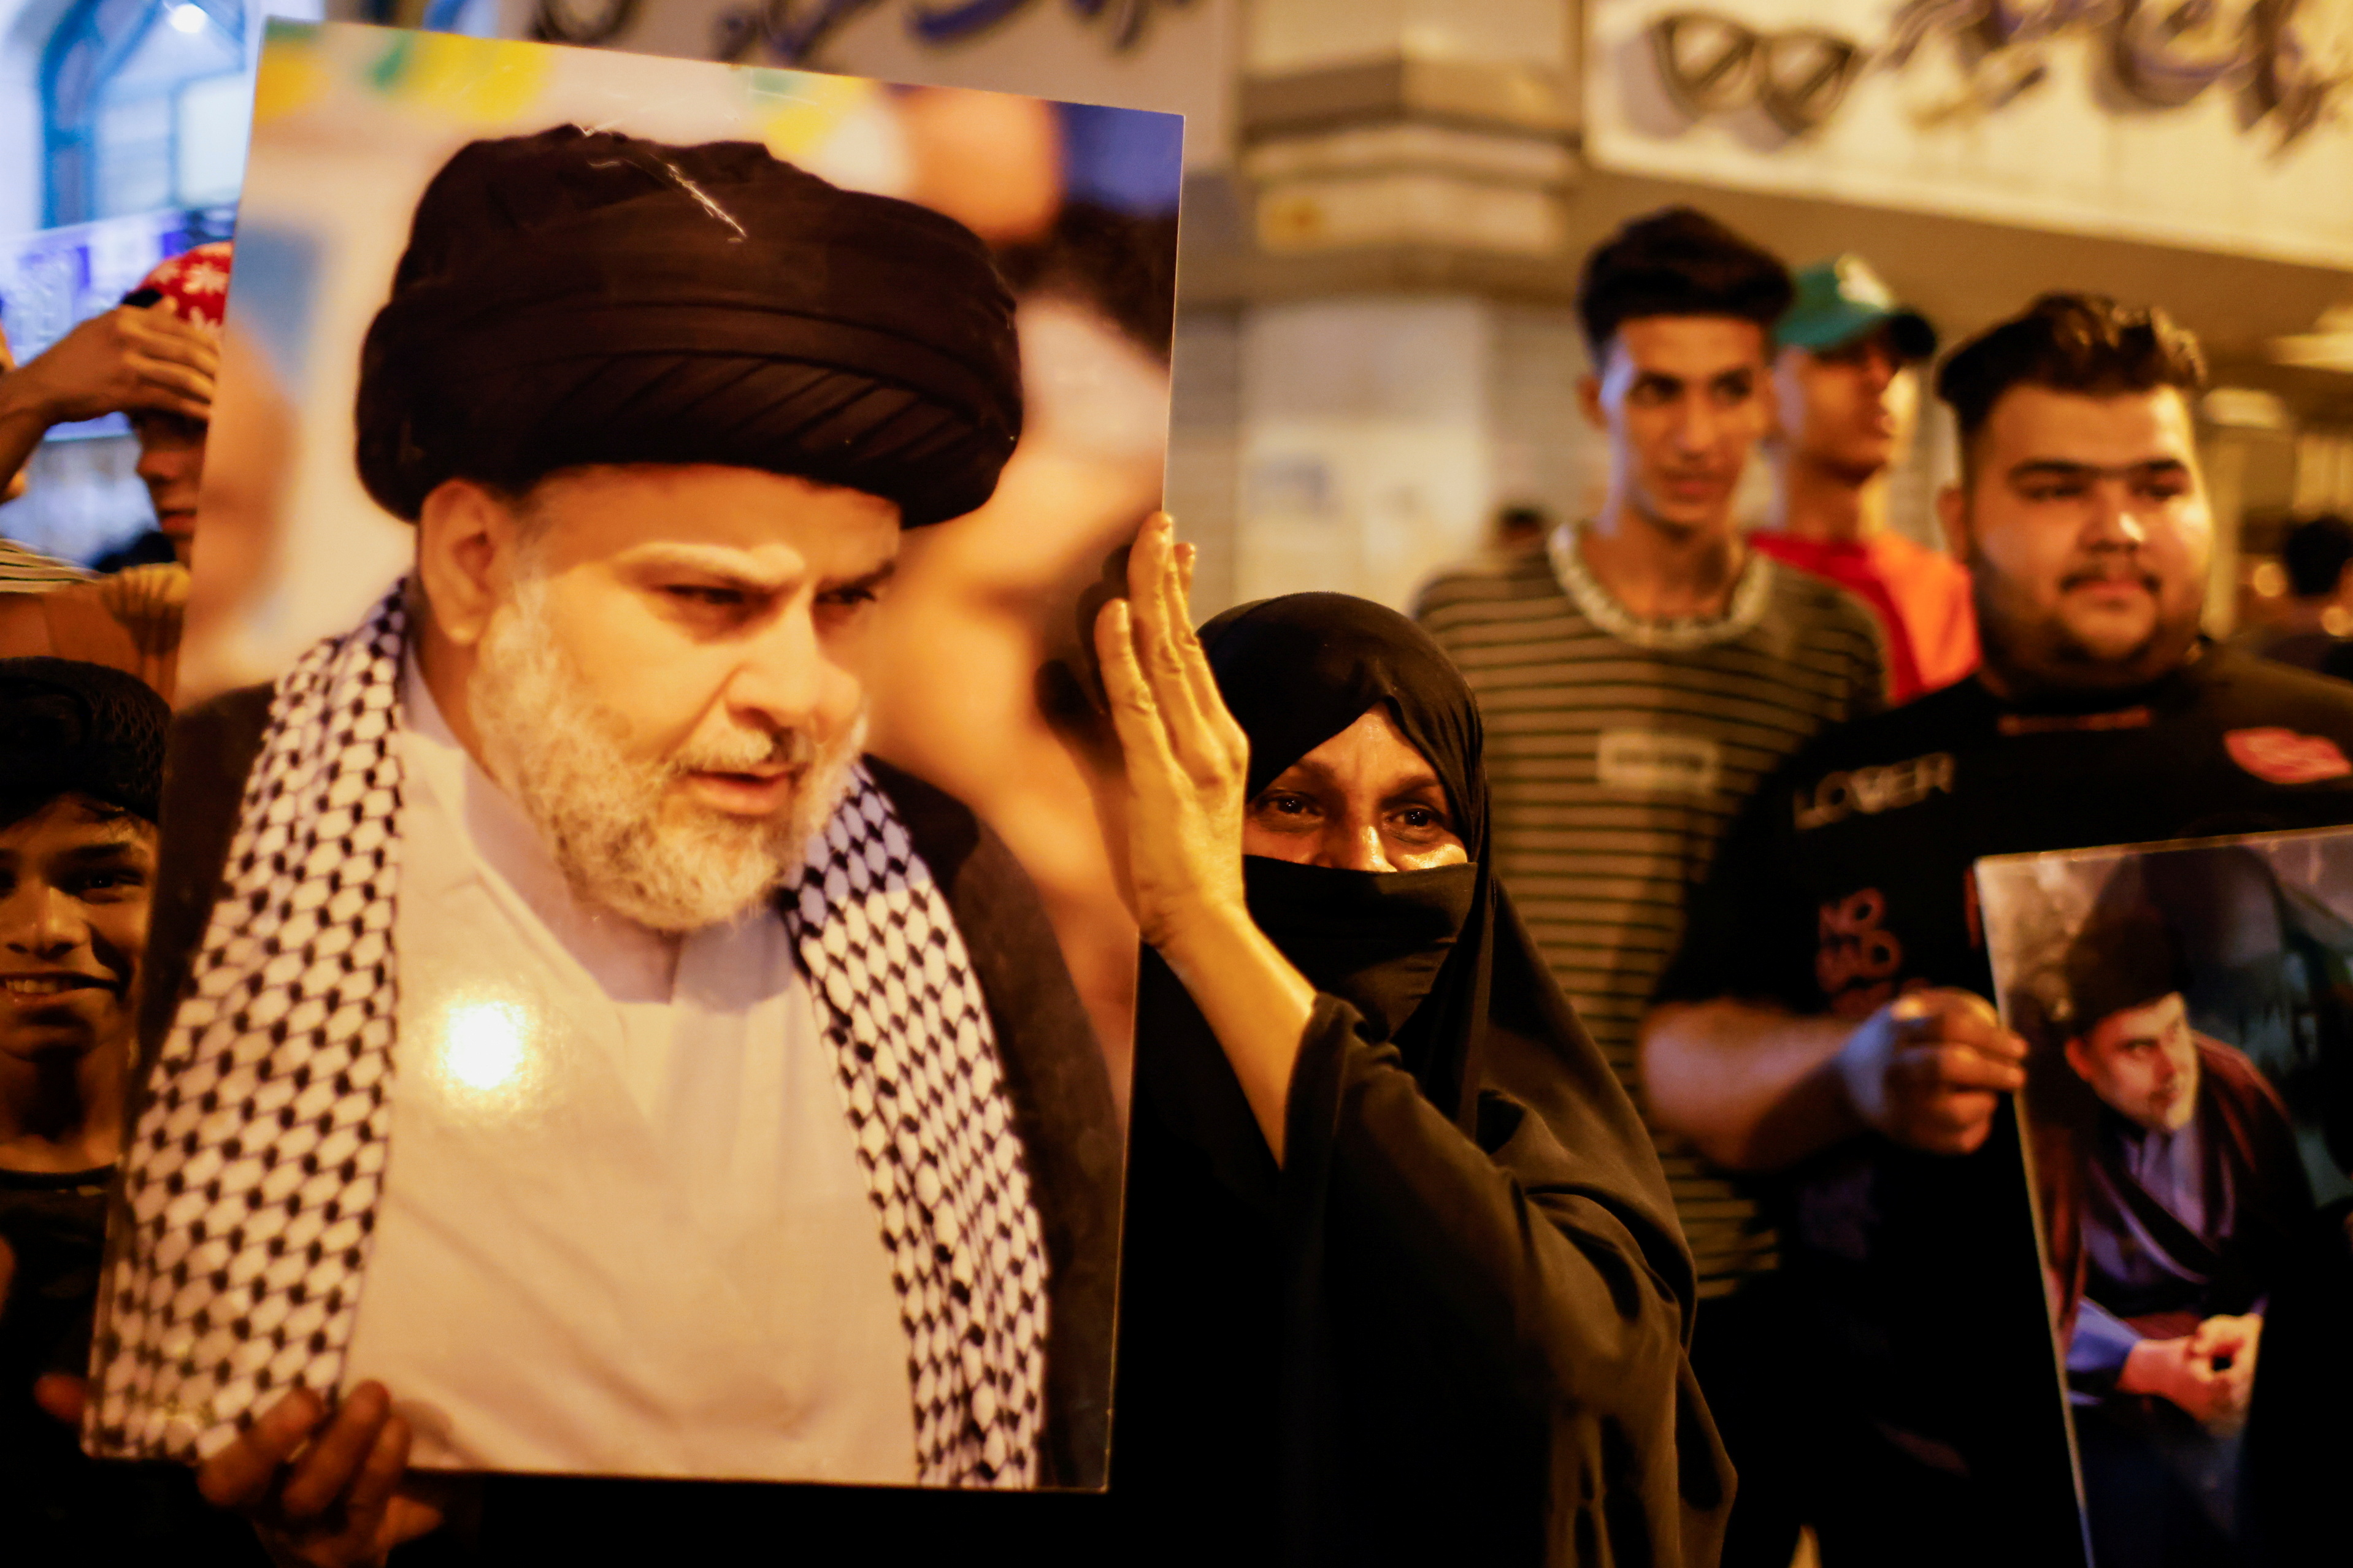 A woman holds a picture of Sadr's movement leader Moqtada al-Sadr, as his supporters celebrate after preliminary results of Iraq's parliamentary election were announced in Baghdad, Iraq October 11, 2021. REUTERS/Thaier Al-Sudani/File Photo